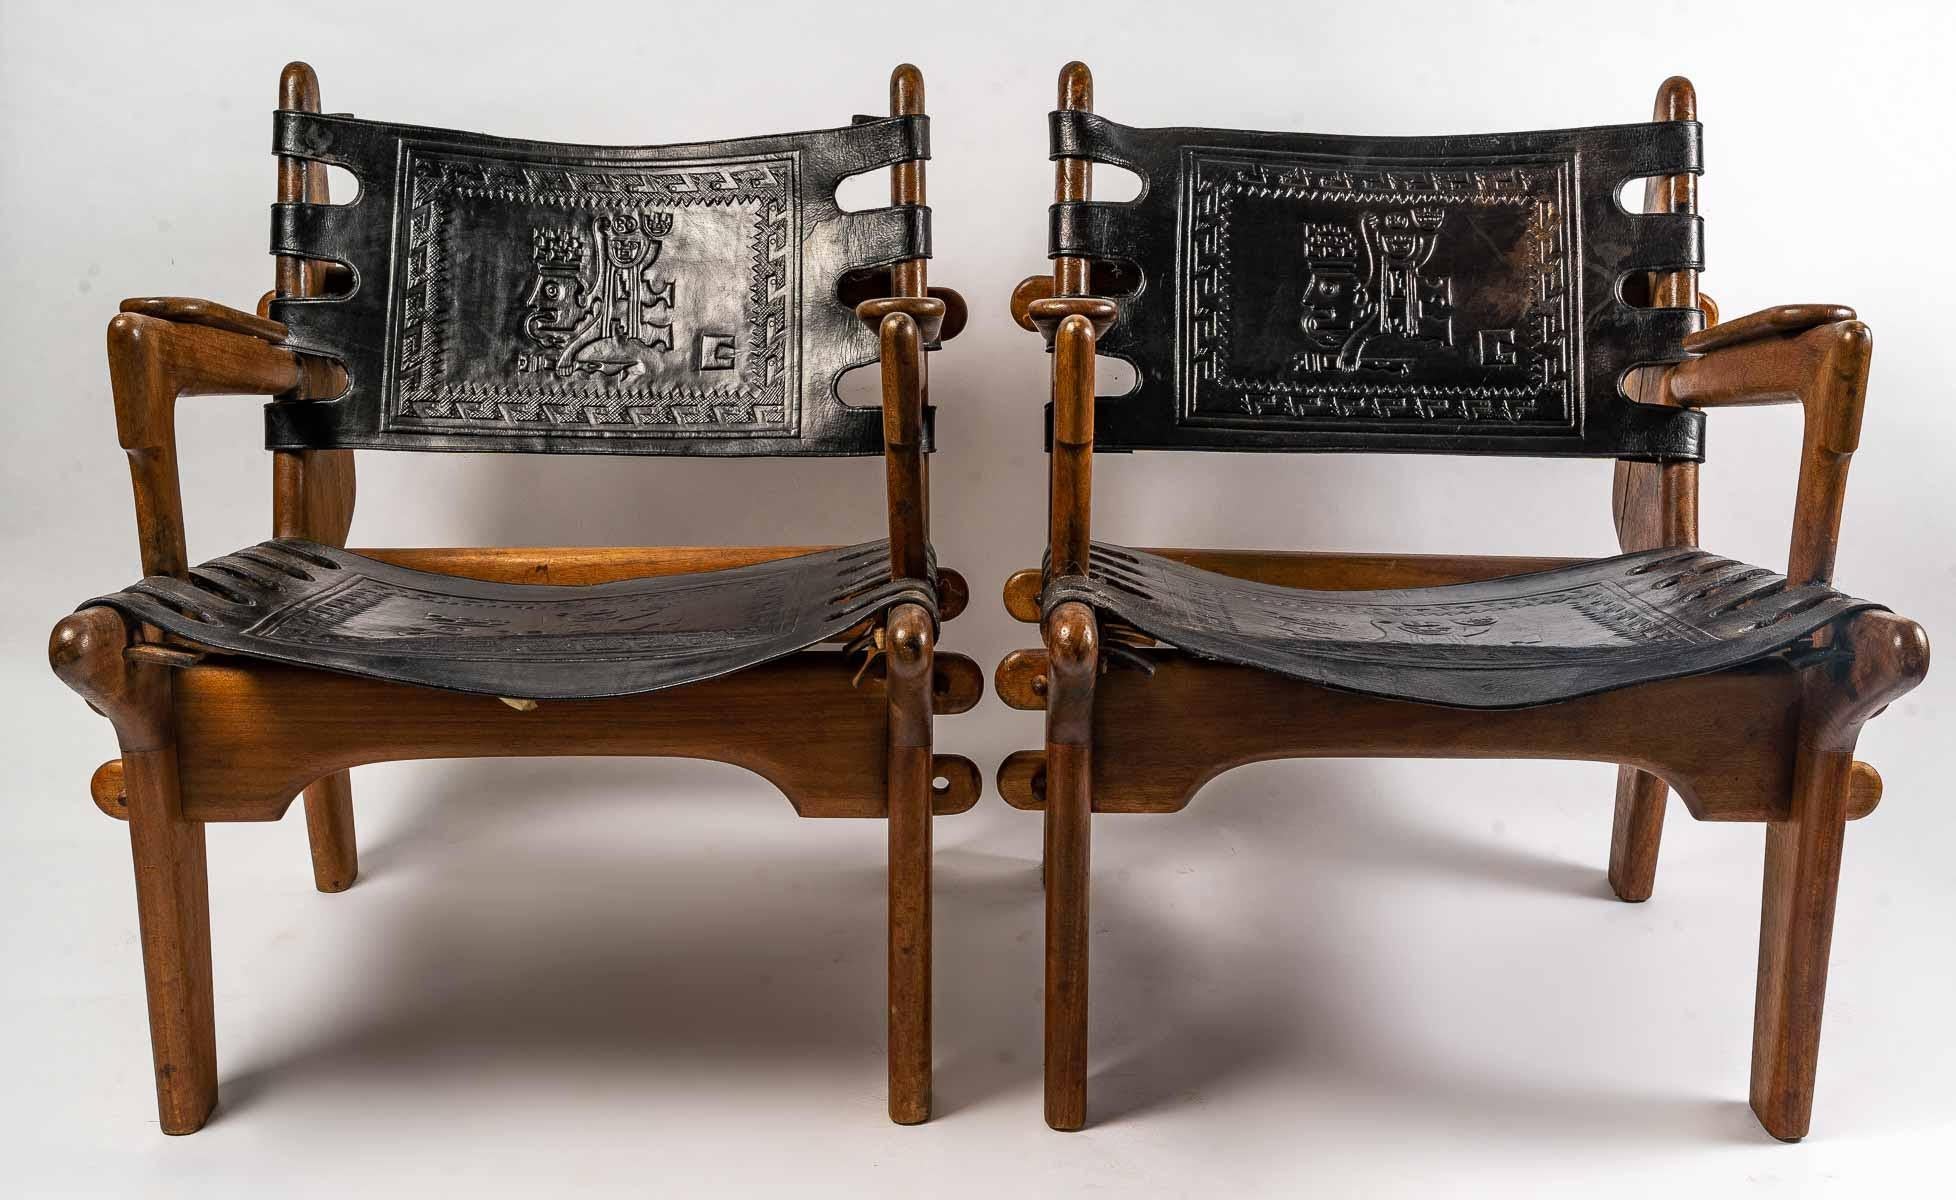 Pair of designer armchairs by Angel Pazmino, wood and leather, 1960
Measures: H: 78 cm, W: 65 cm, D: 75 cm.